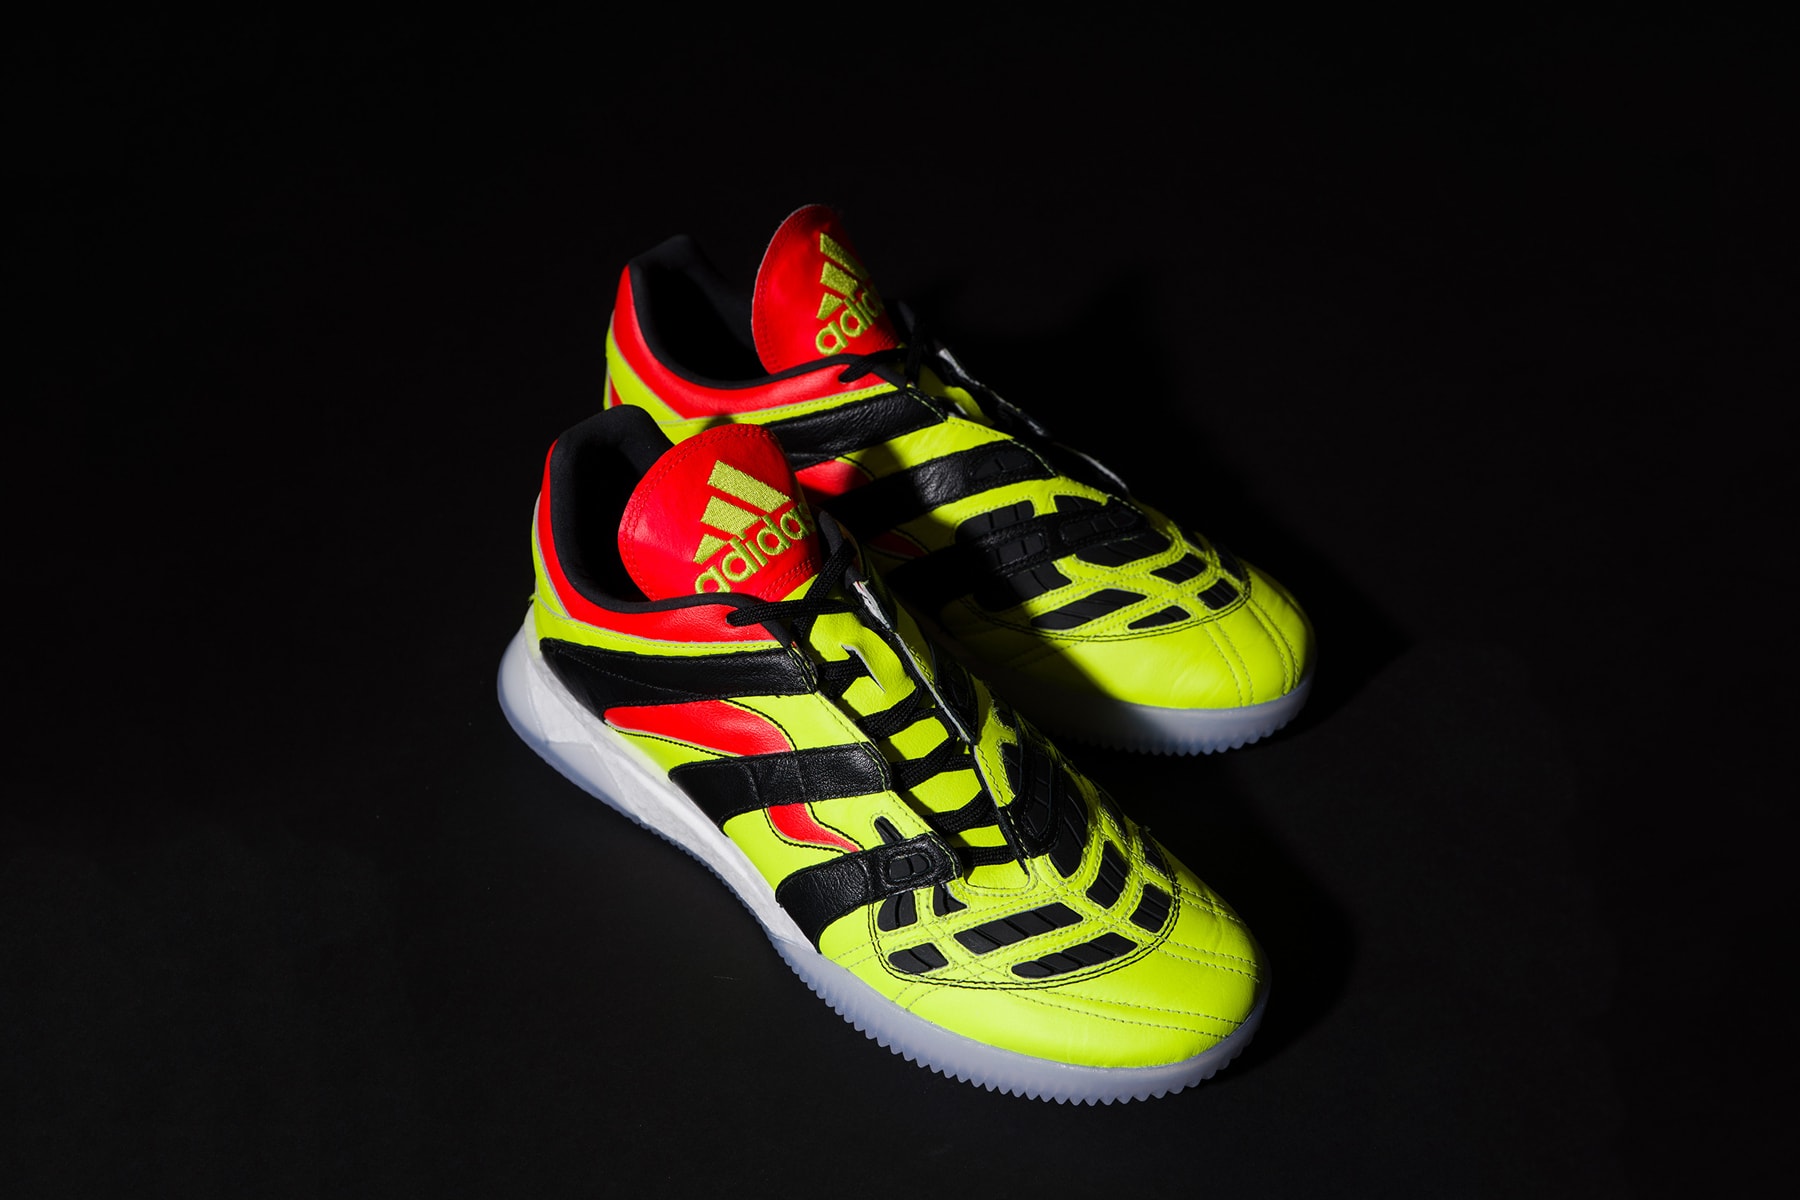 Adidas Predator Accelerato S Yellow Details Sneakers Kicks Shoes Trainers Boots Cop Purchase Buy Available Now Closer Look David Beckham Deadstock Zinedine Zidane